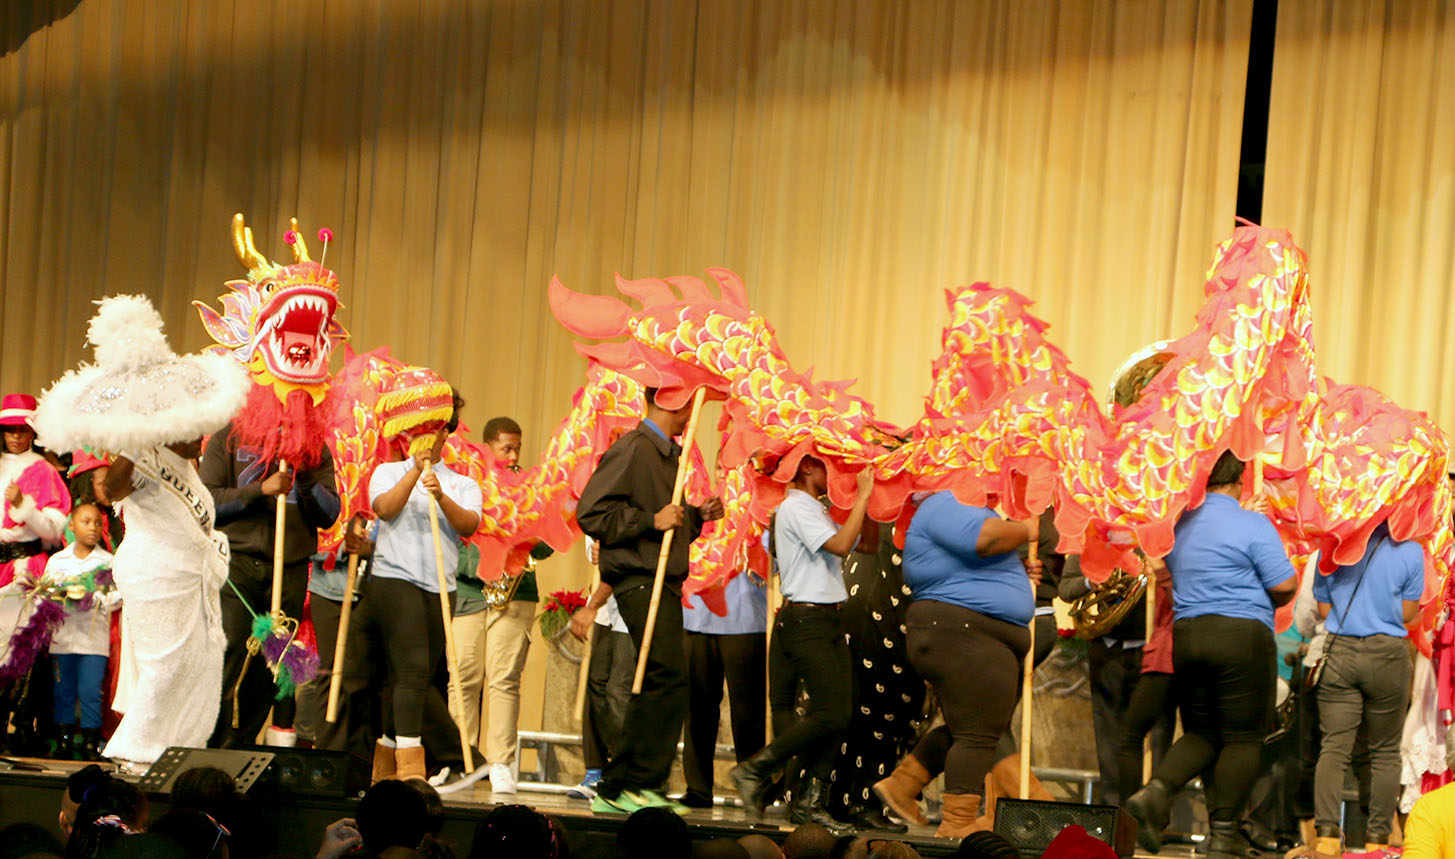 KSU Cultural Fest with students portraying a dragon on stage